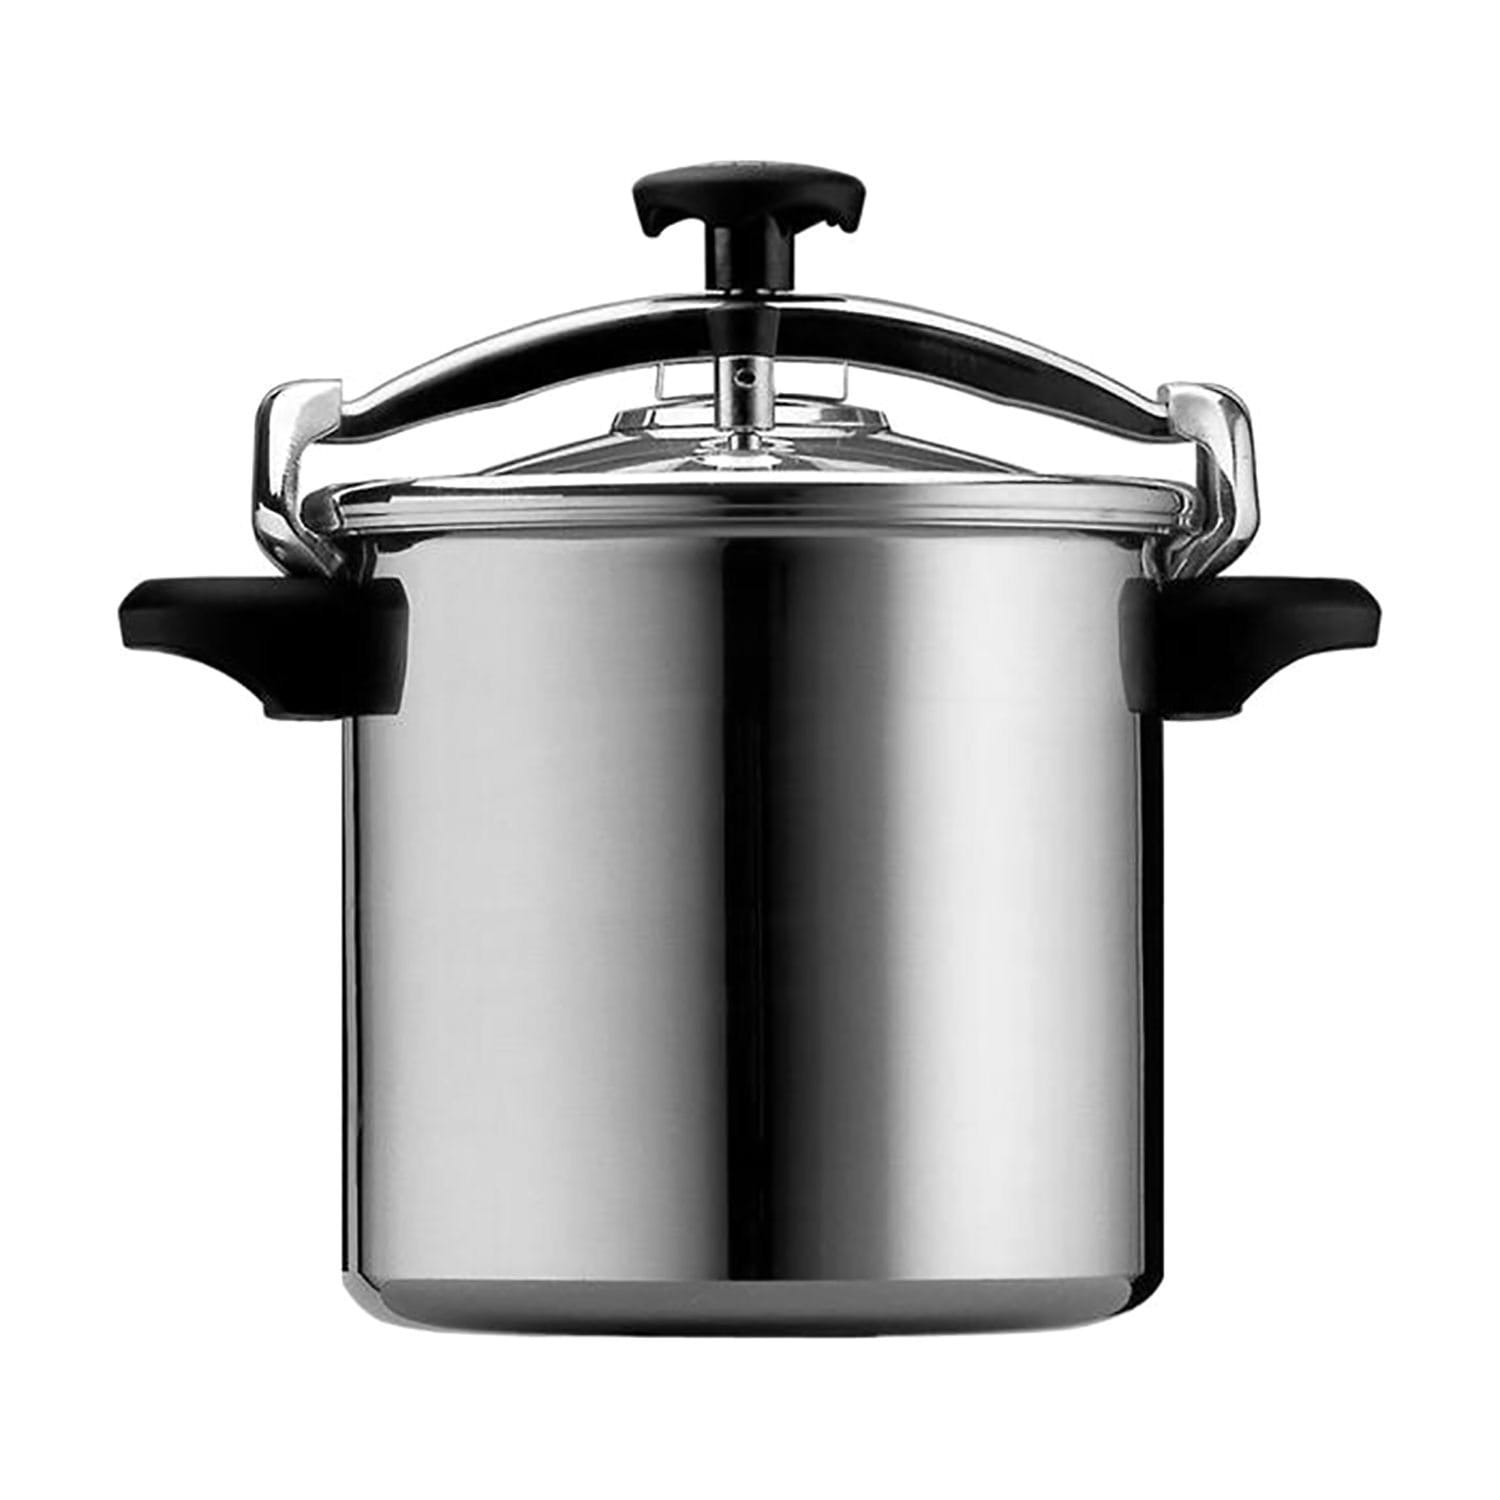 Silampos Pressure Cooker - Silver - 643122018612B - Jashanmal Home